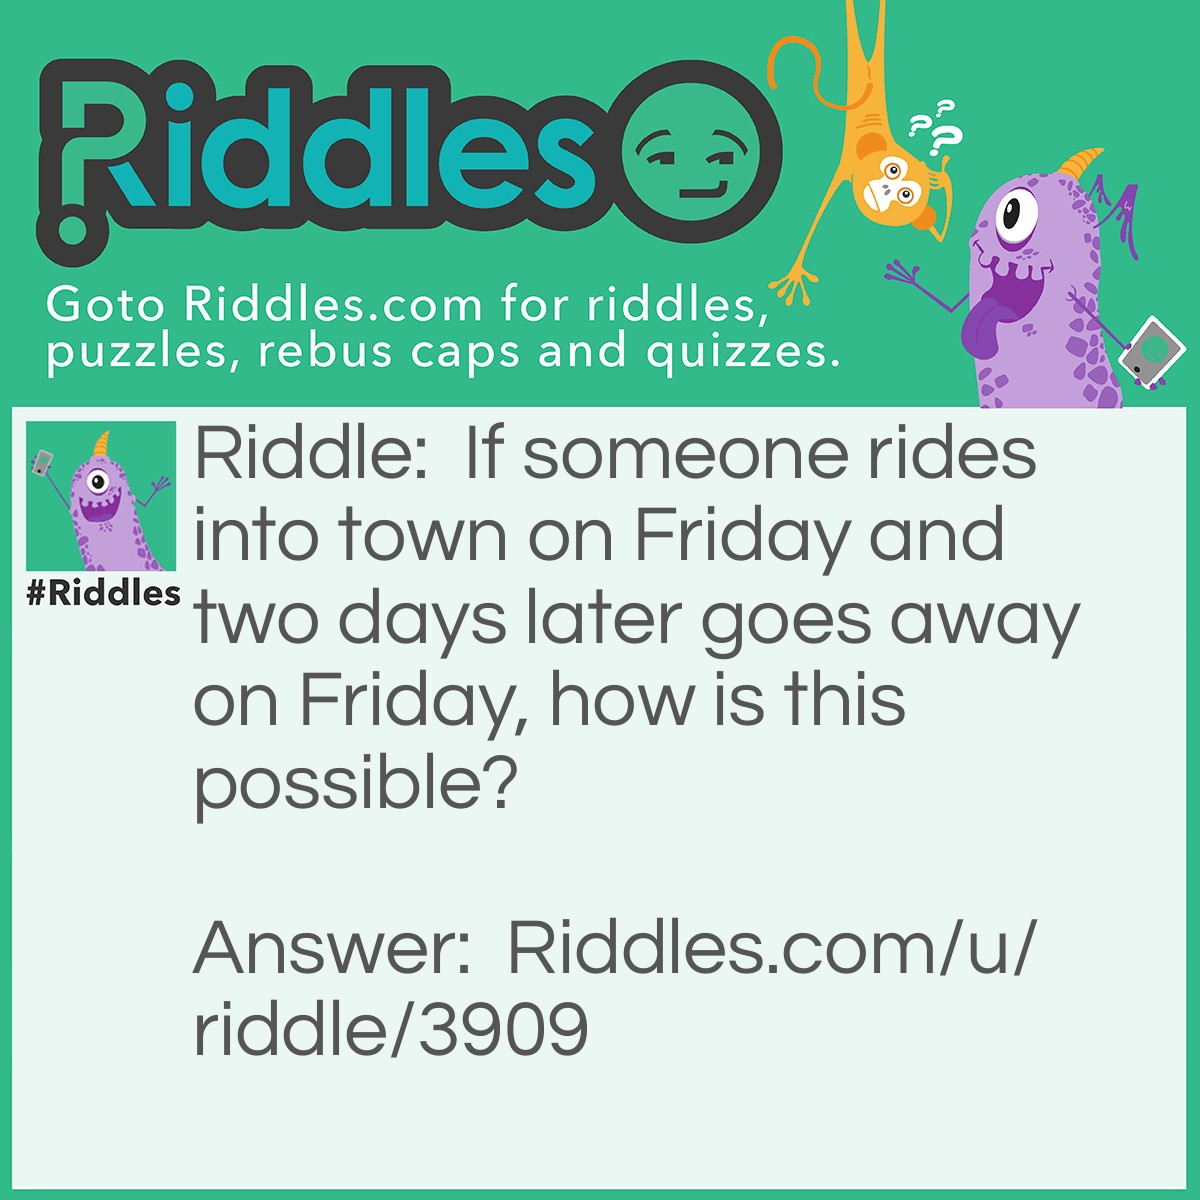 Riddle: If someone rides into town on Friday and two days later goes away on Friday, how is this possible? Answer: The horses name is Friday!